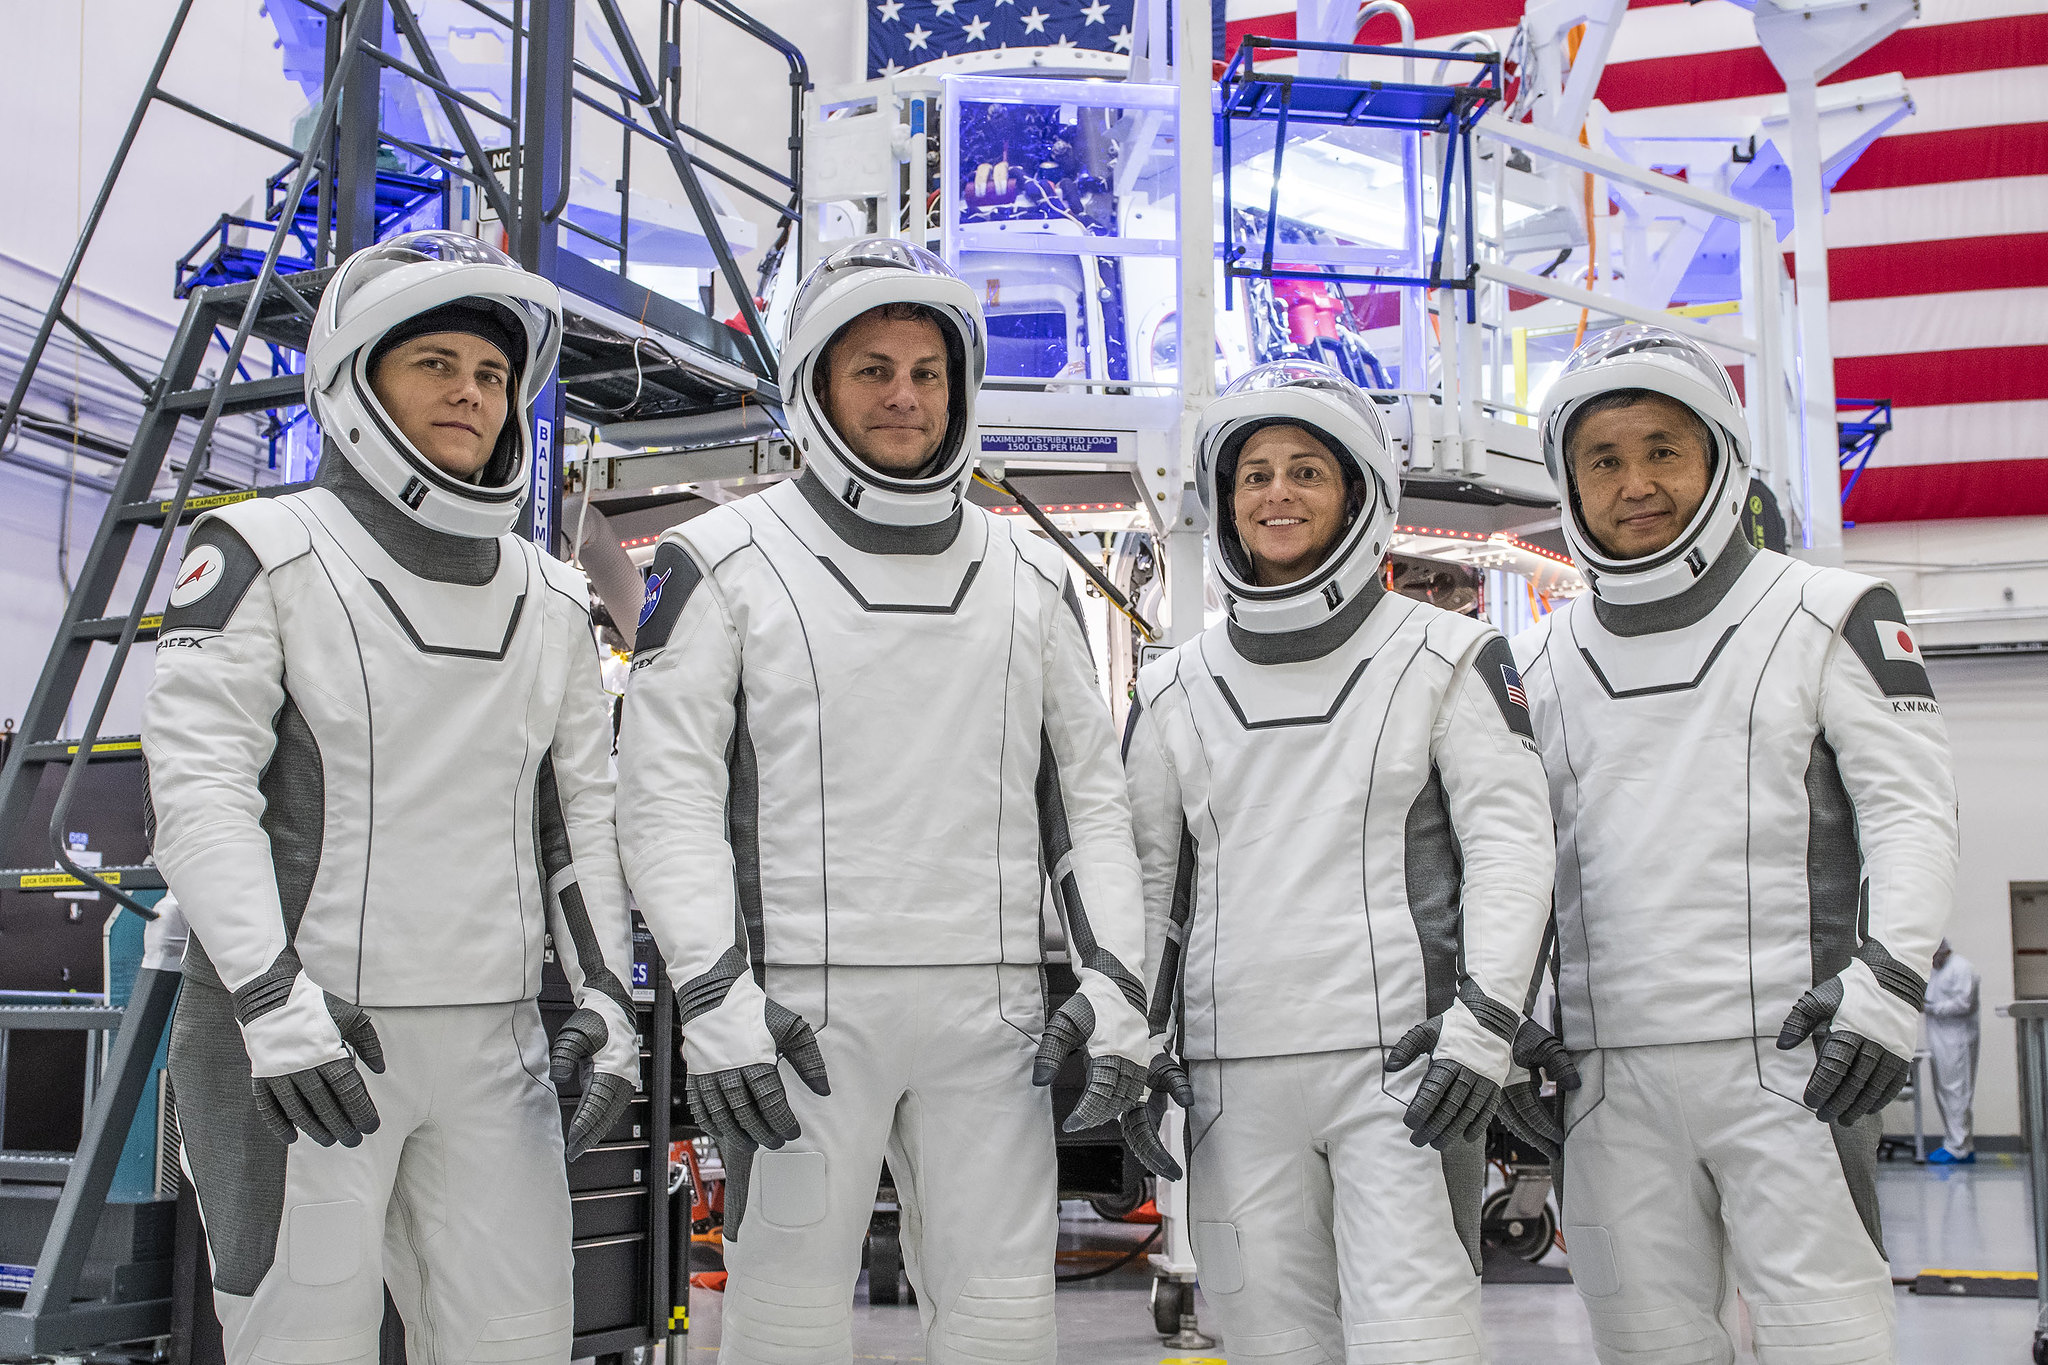 SpaceX Crew-5 astronauts line up wearing spacesuits, in front of unidentified space hardware and an American flag on the wall